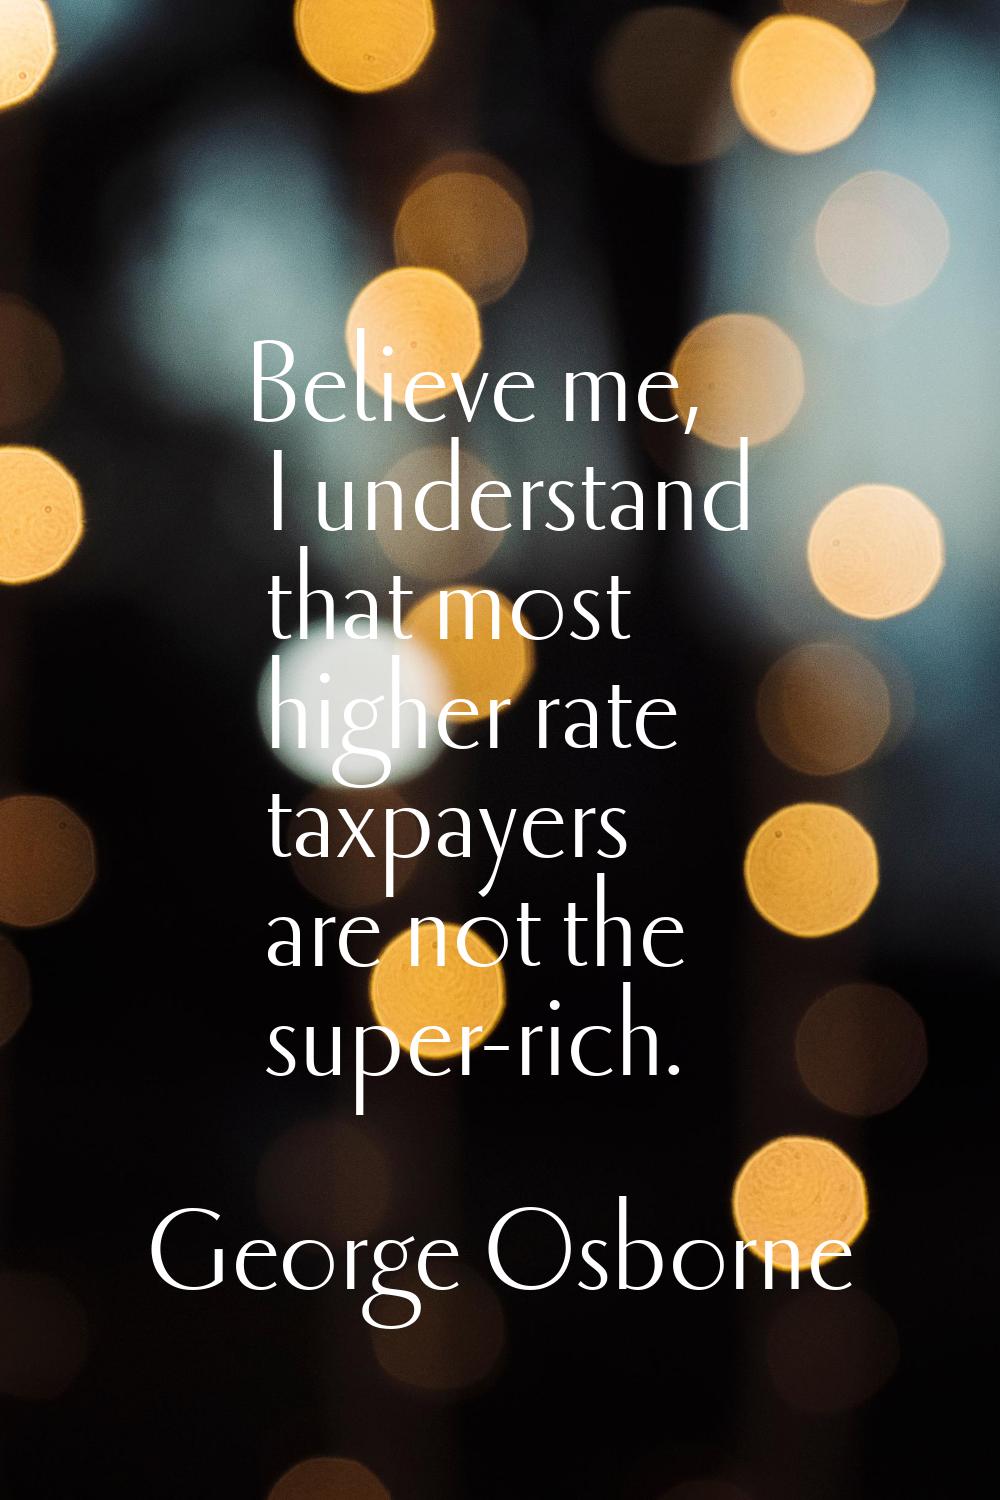 Believe me, I understand that most higher rate taxpayers are not the super-rich.